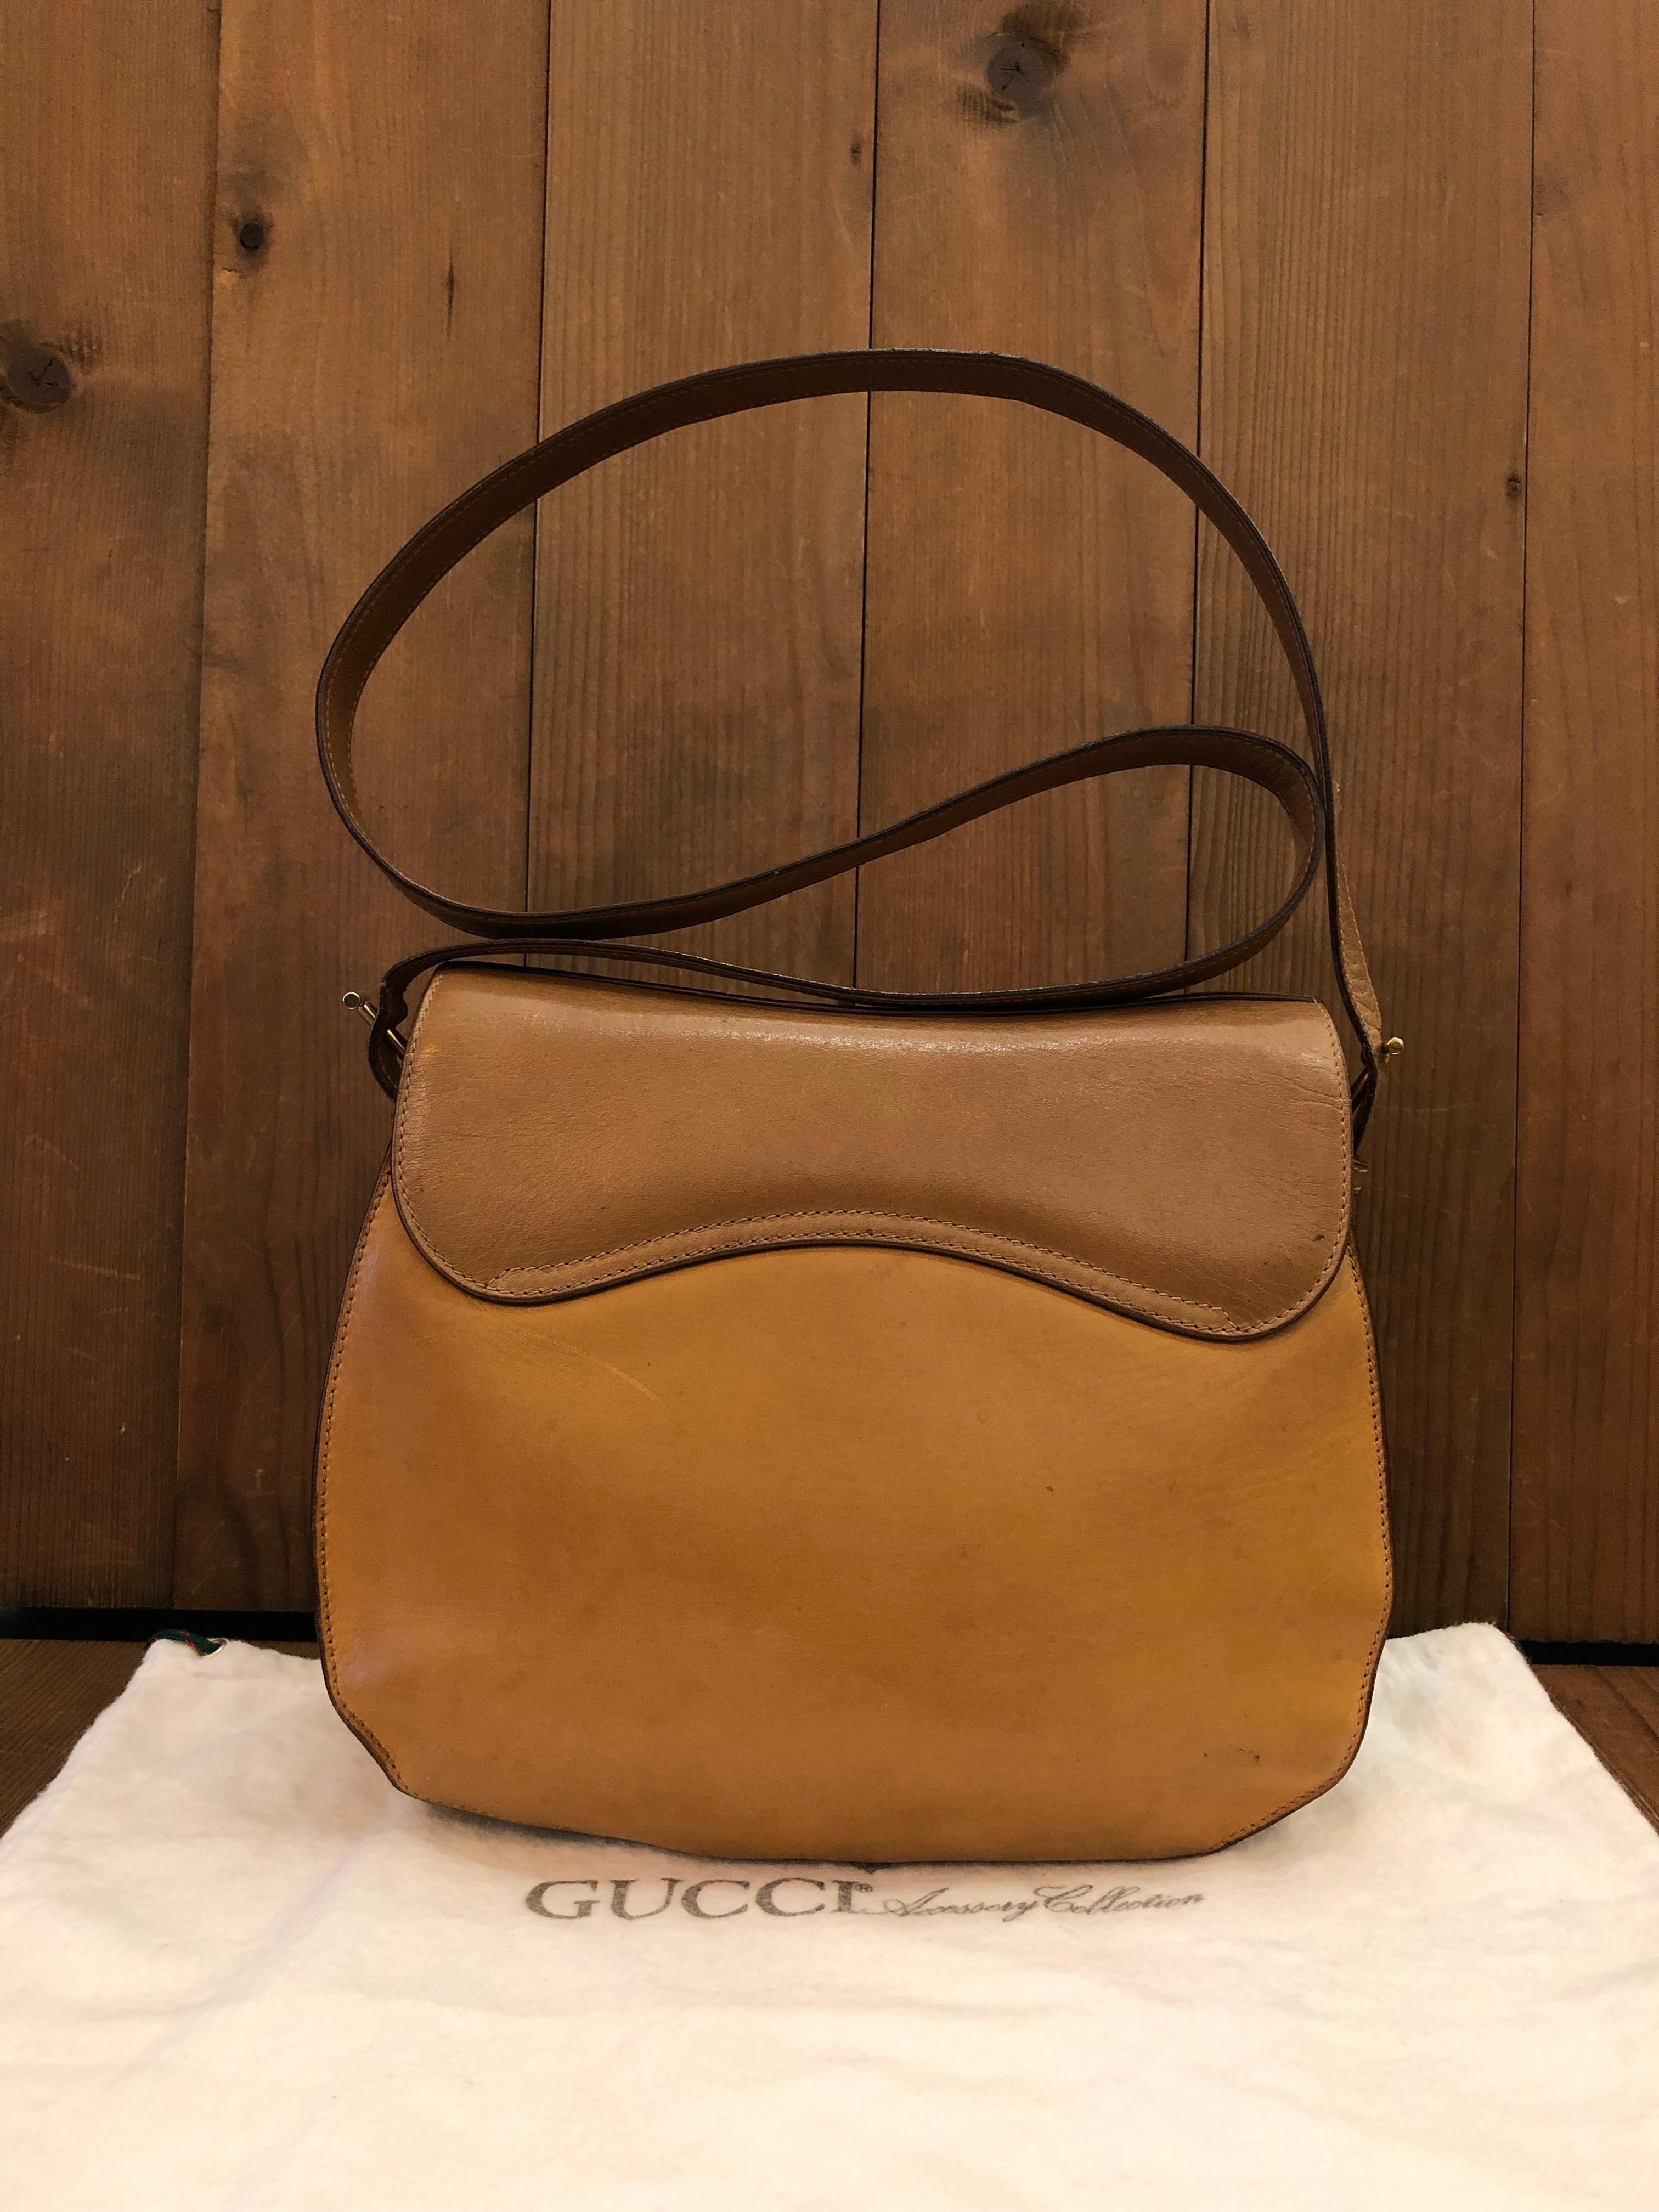 This 1980s vintage GUCCI saddle bag is crafted of smooth calfskin leather in camel featuring gold toned hardware and equestrian accent. Front magnetic snap closure opens to a neutral leather interior featuring a zippered pocket. Made in Italy.